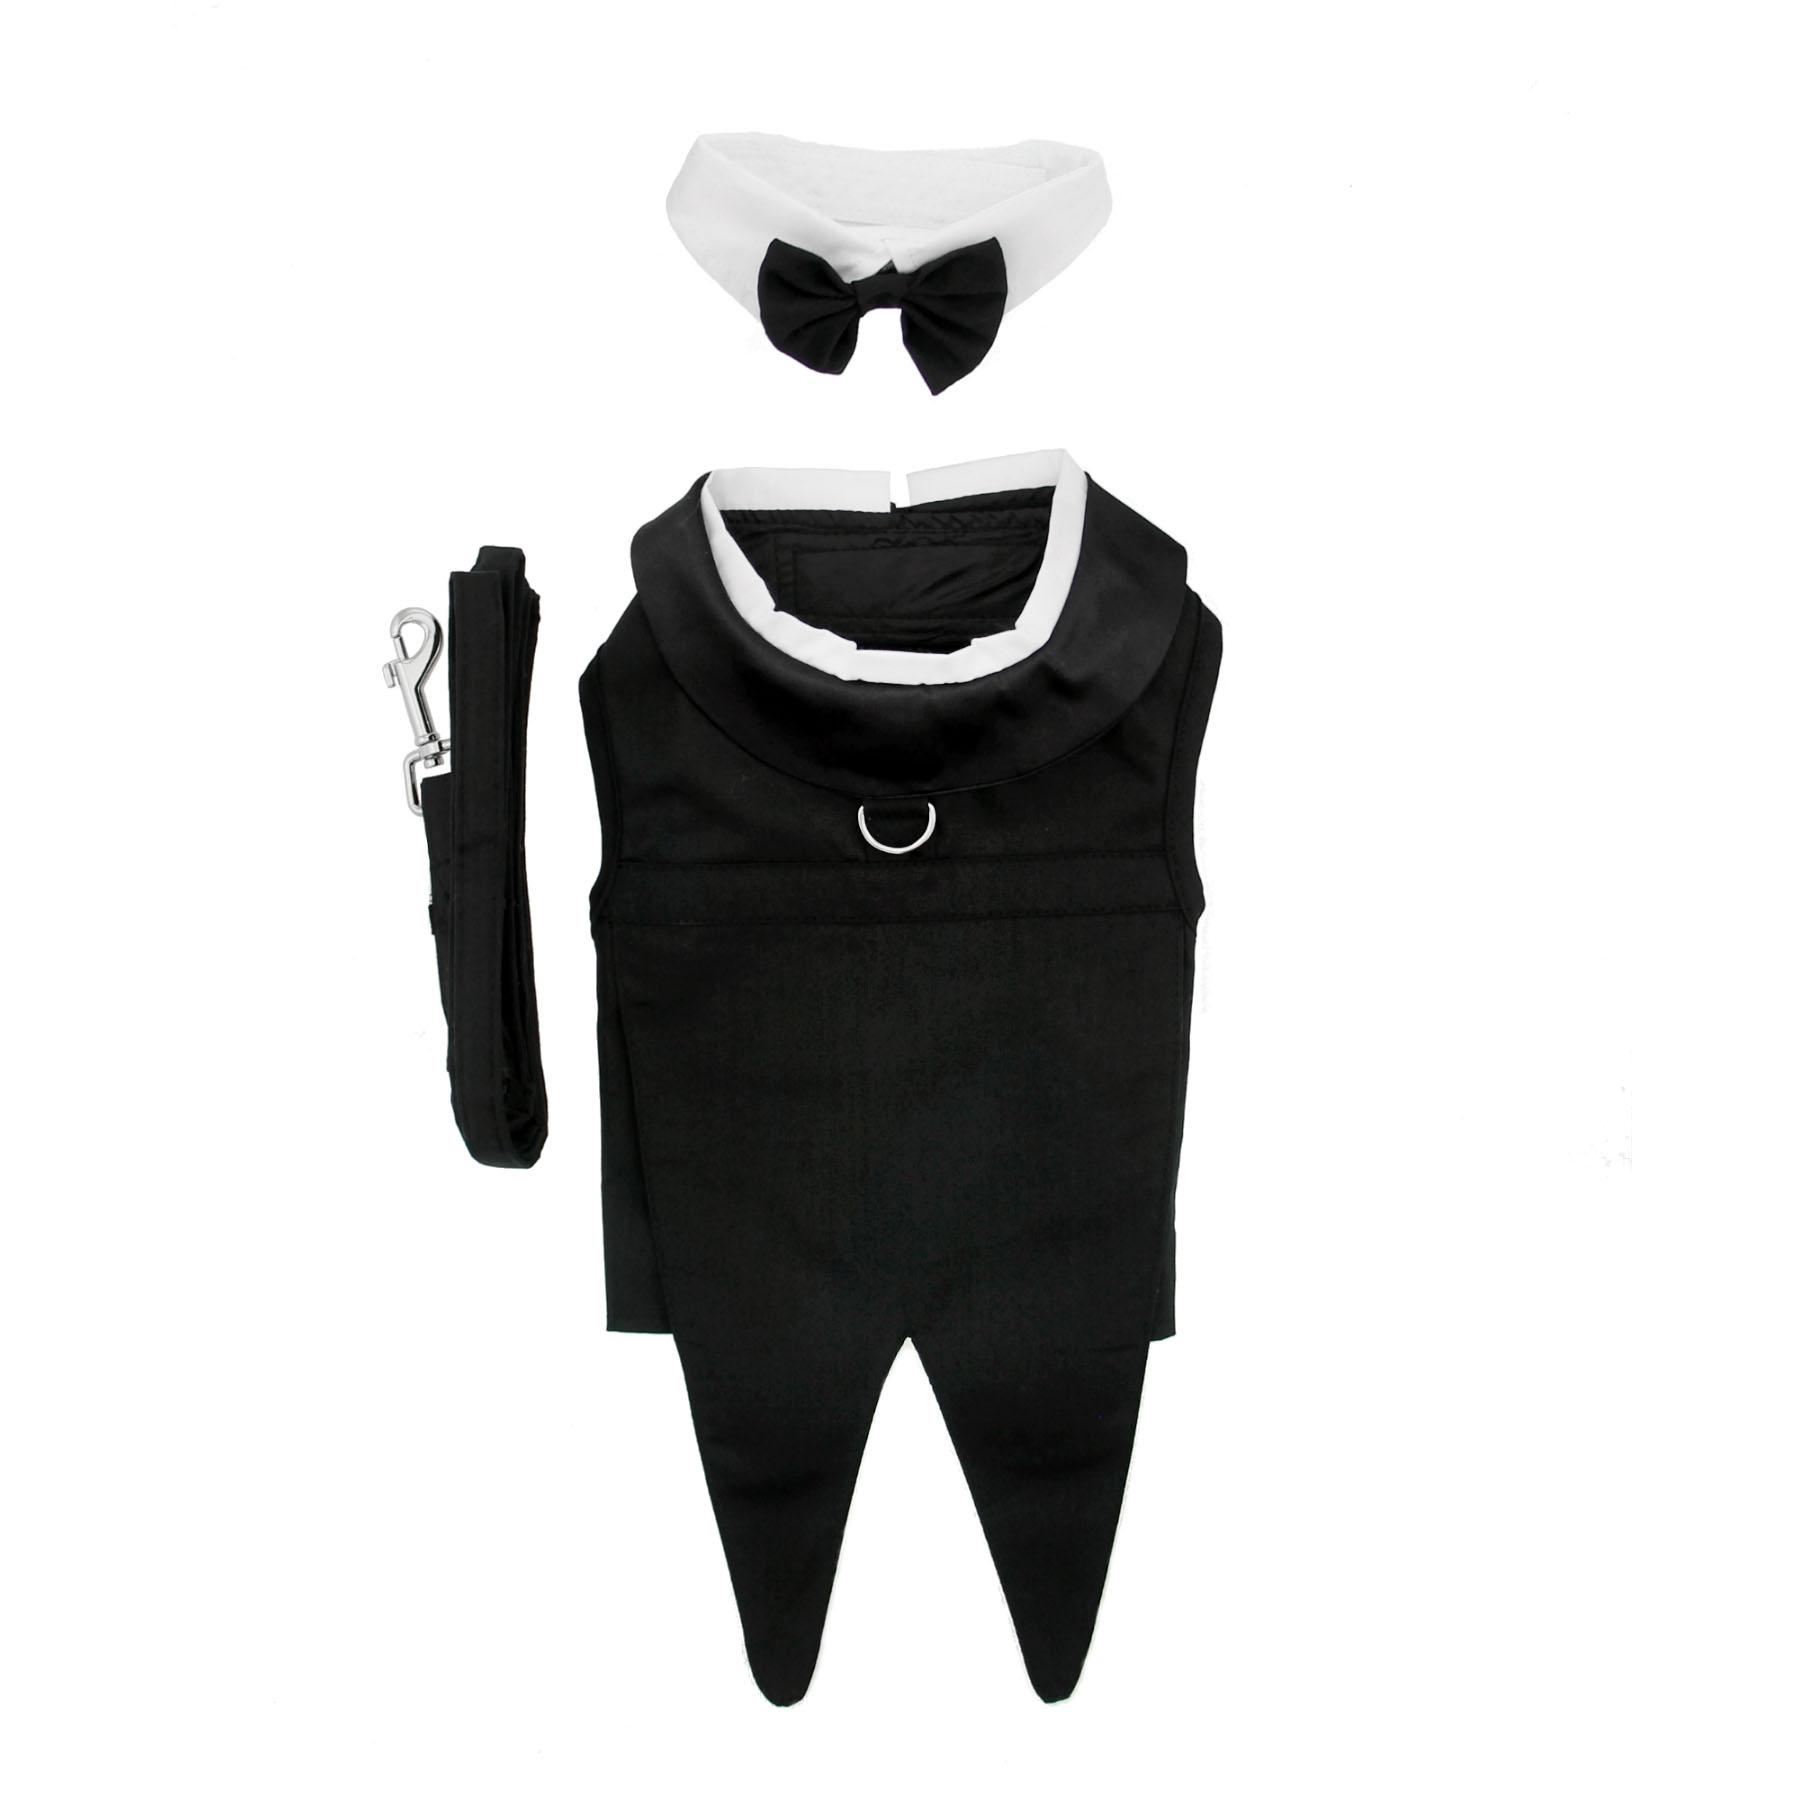 Classic Dog Tuxedo Set with Tails by Doggie Design